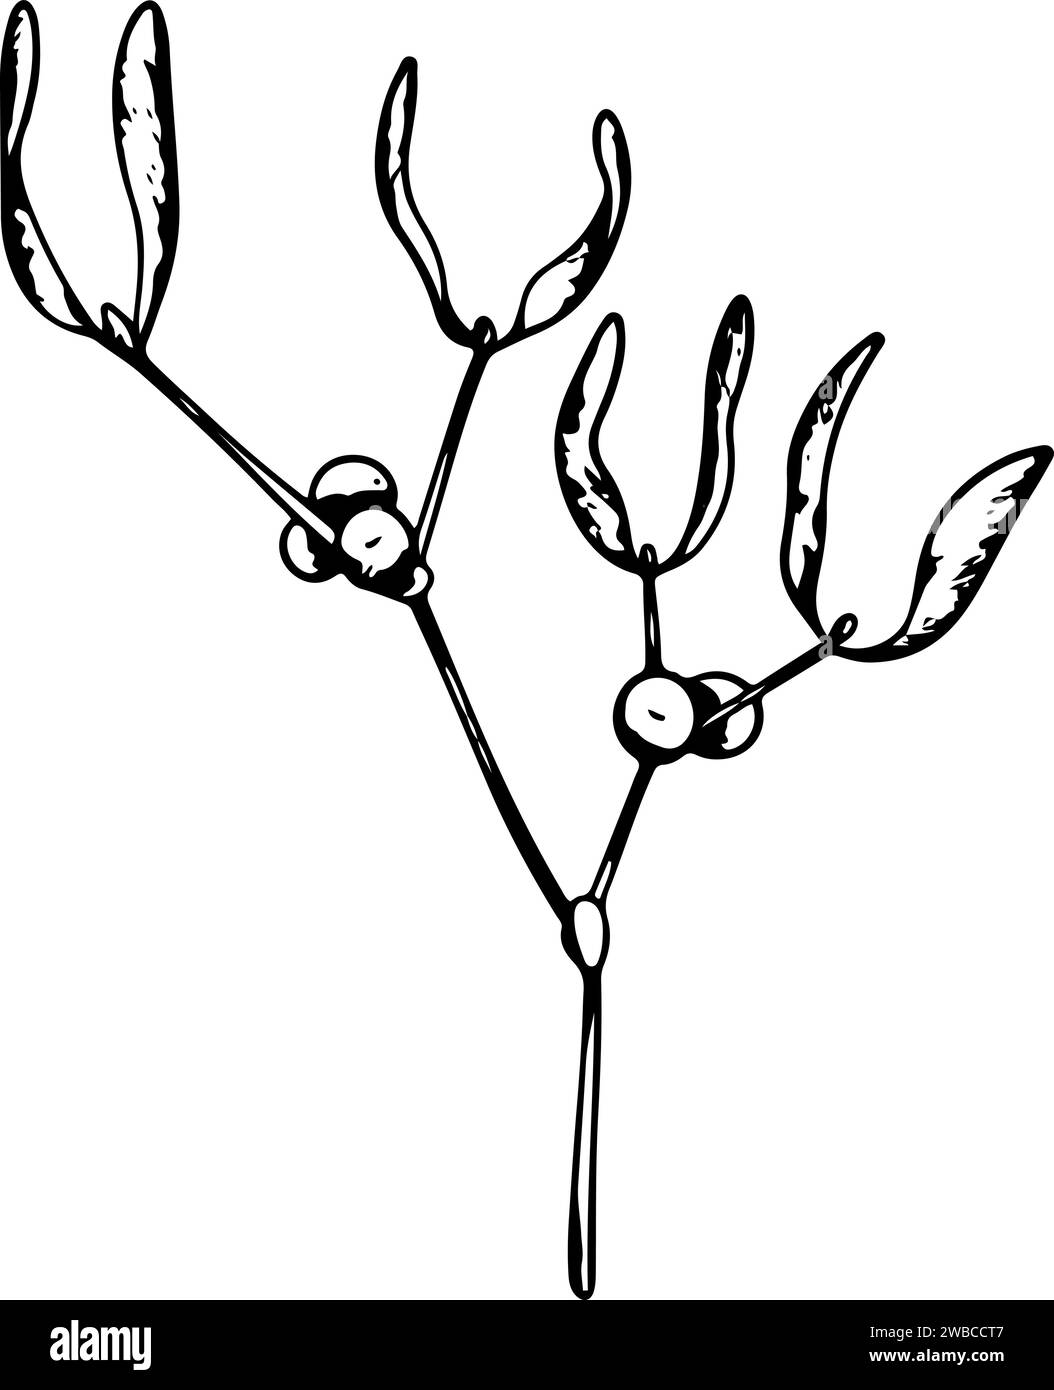 Mistletoe or Viscum branches with leaves and berries. Botanical line art element. Winter plant ink graphic. Hand painted outline illustration for Stock Vector